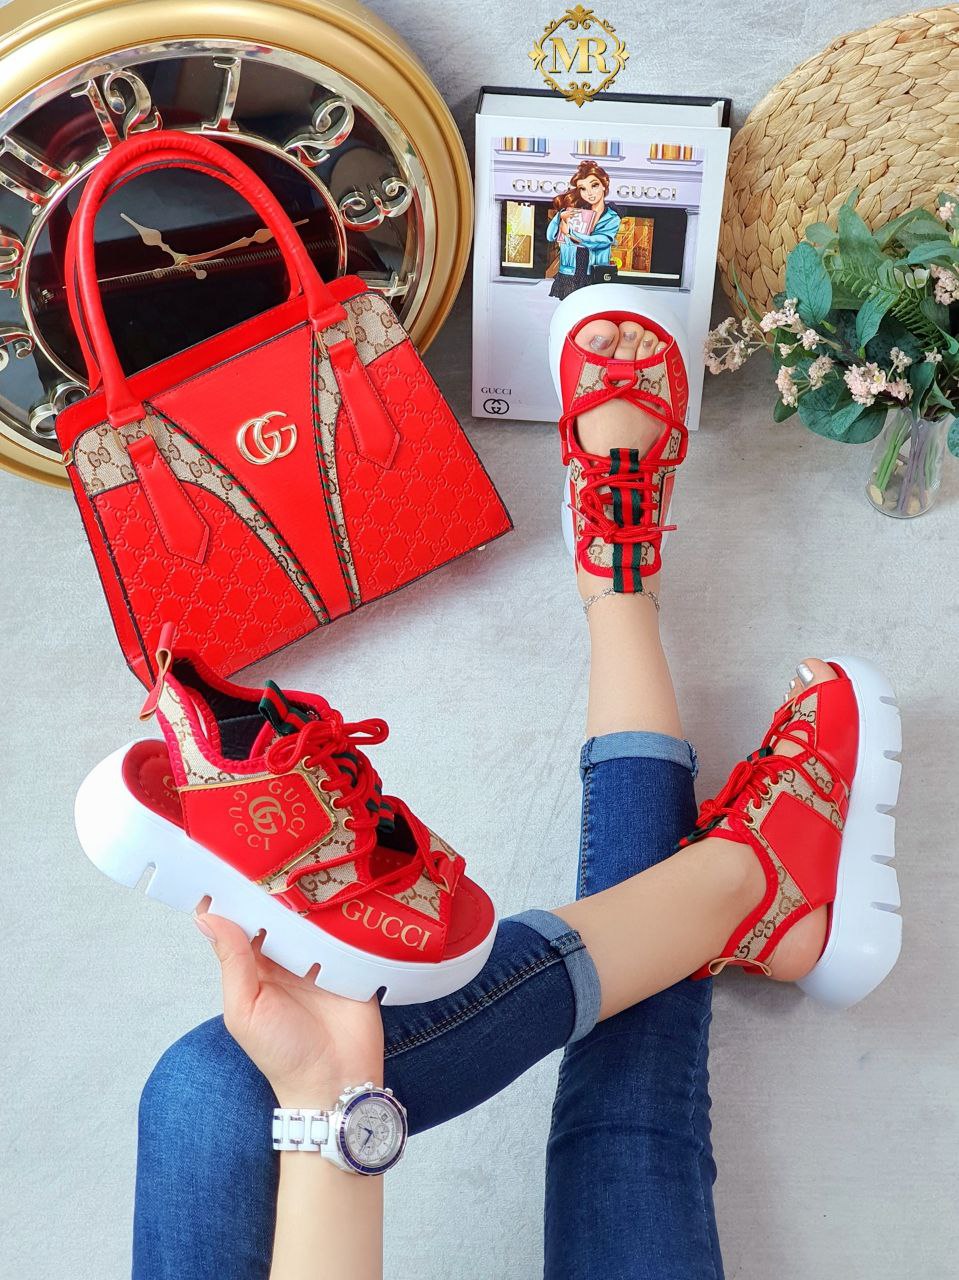 Gucci ankle strap sandals with matching shoulder bags